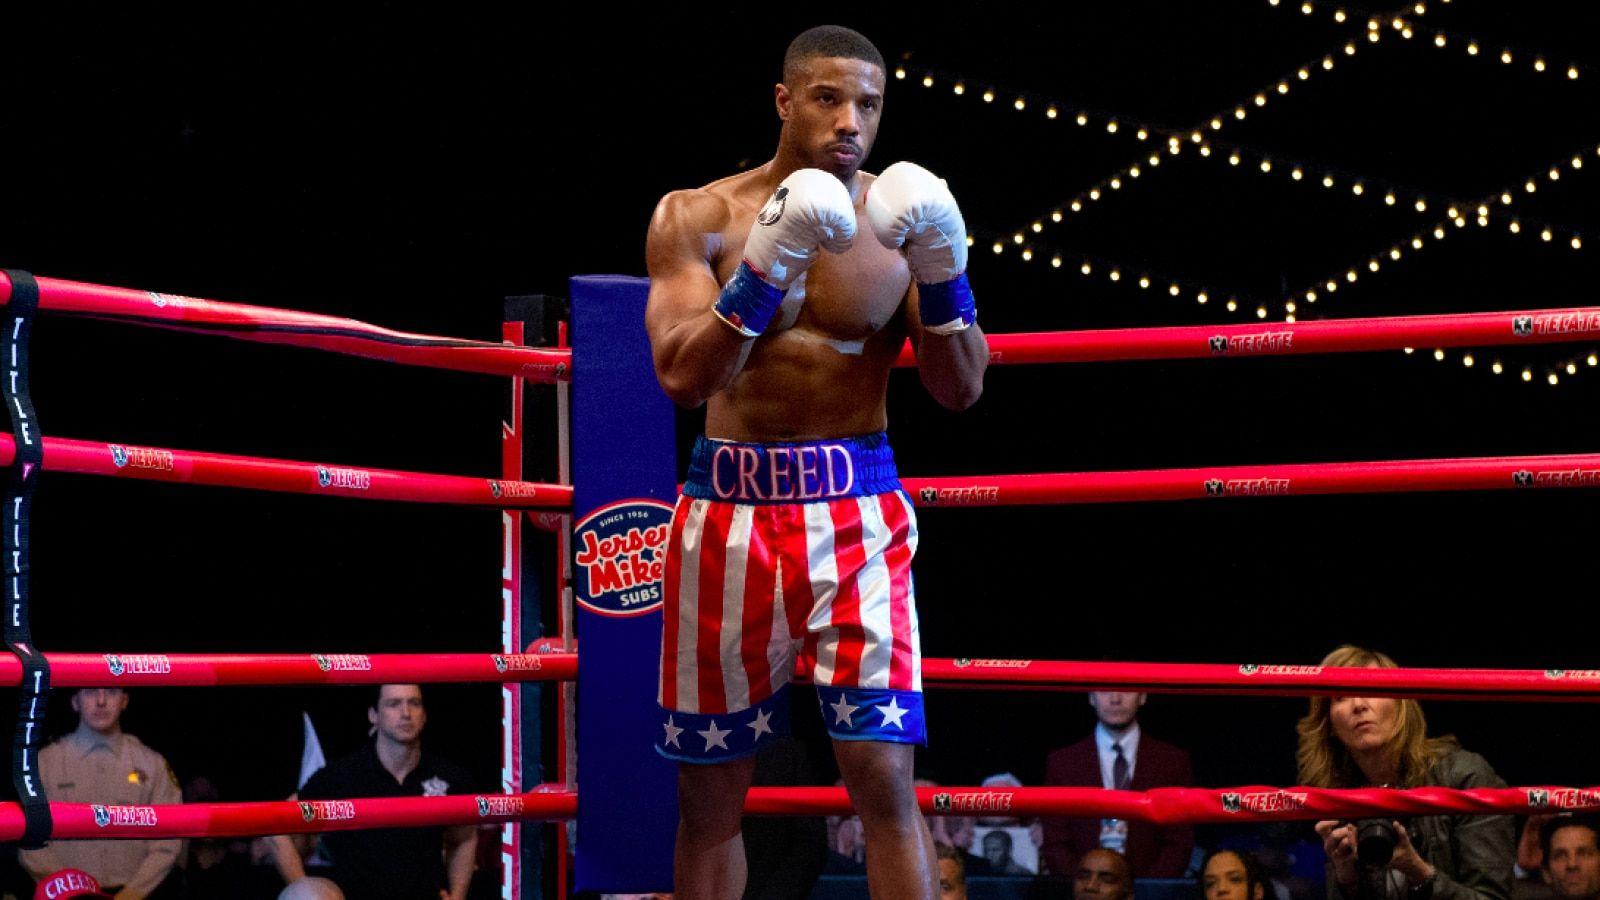 Ridoola's blog, Tech: The director of 'Creed 2' explains